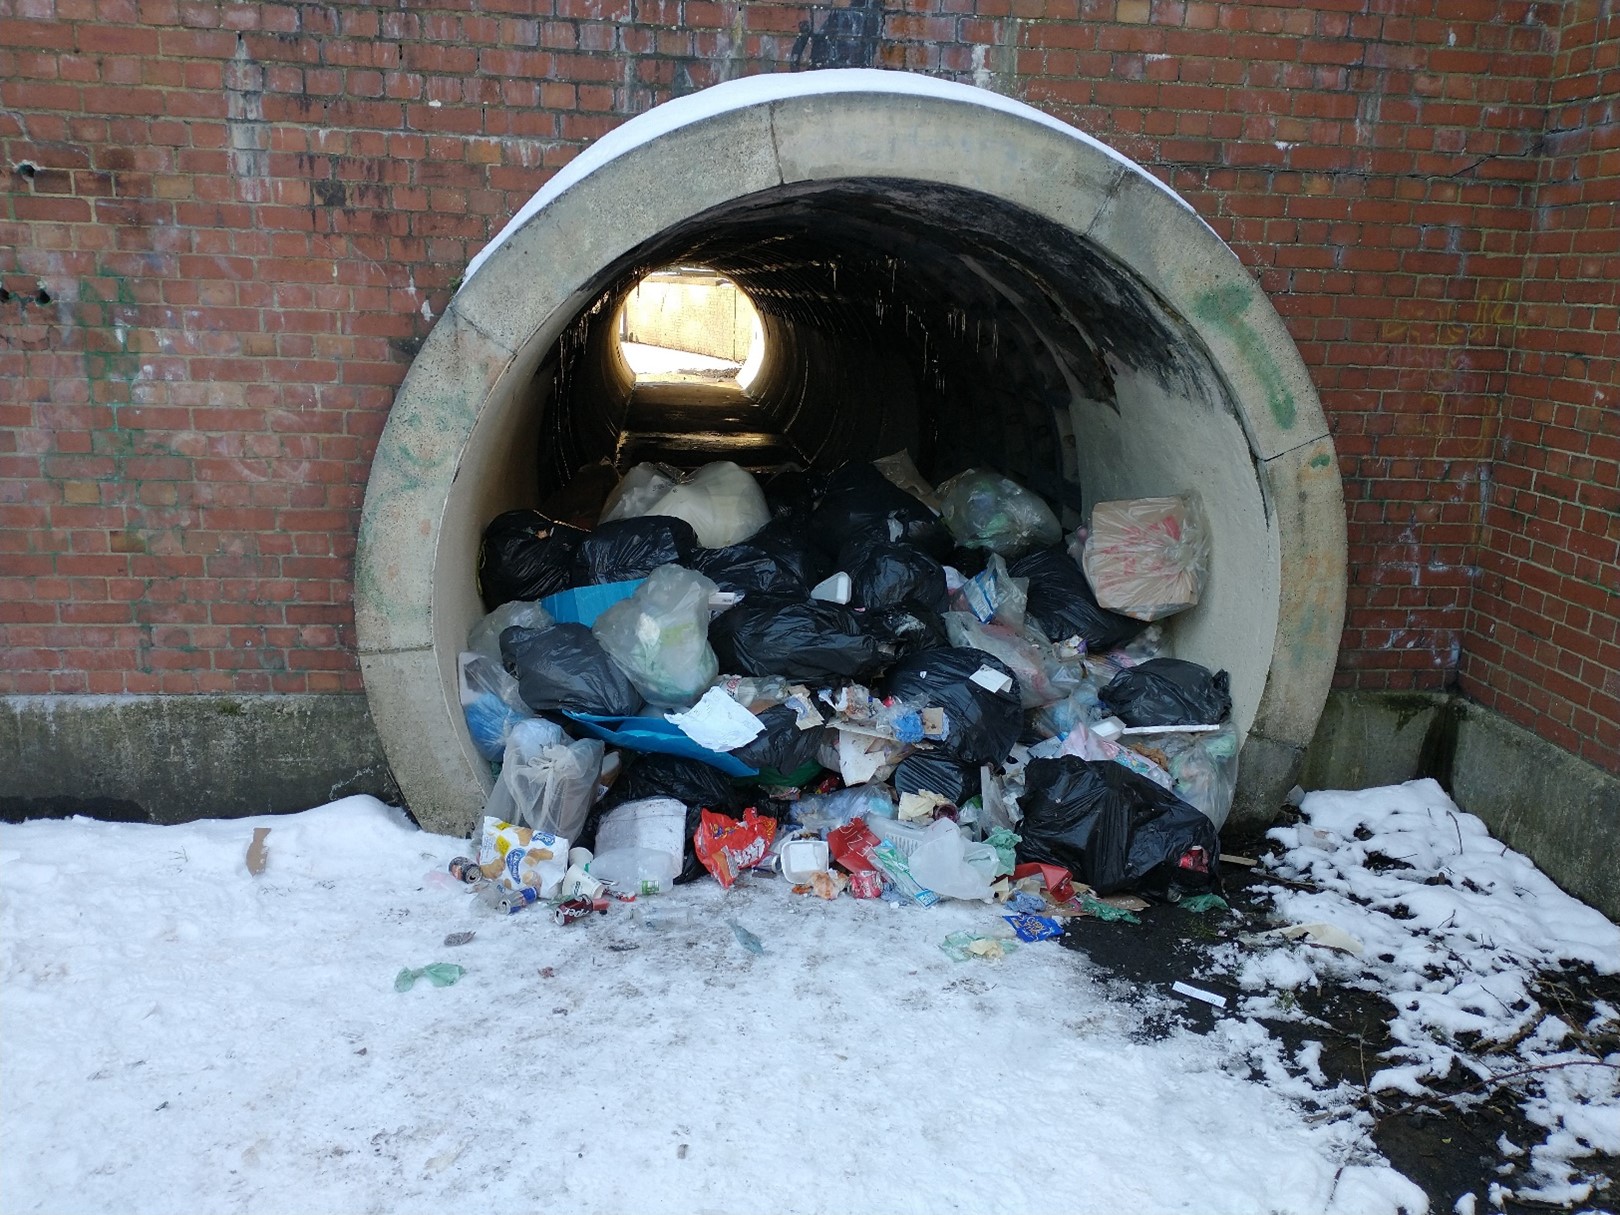 The image shows fly-tipped waste partially blocking a pedestrian tunnel at Lambton Lane